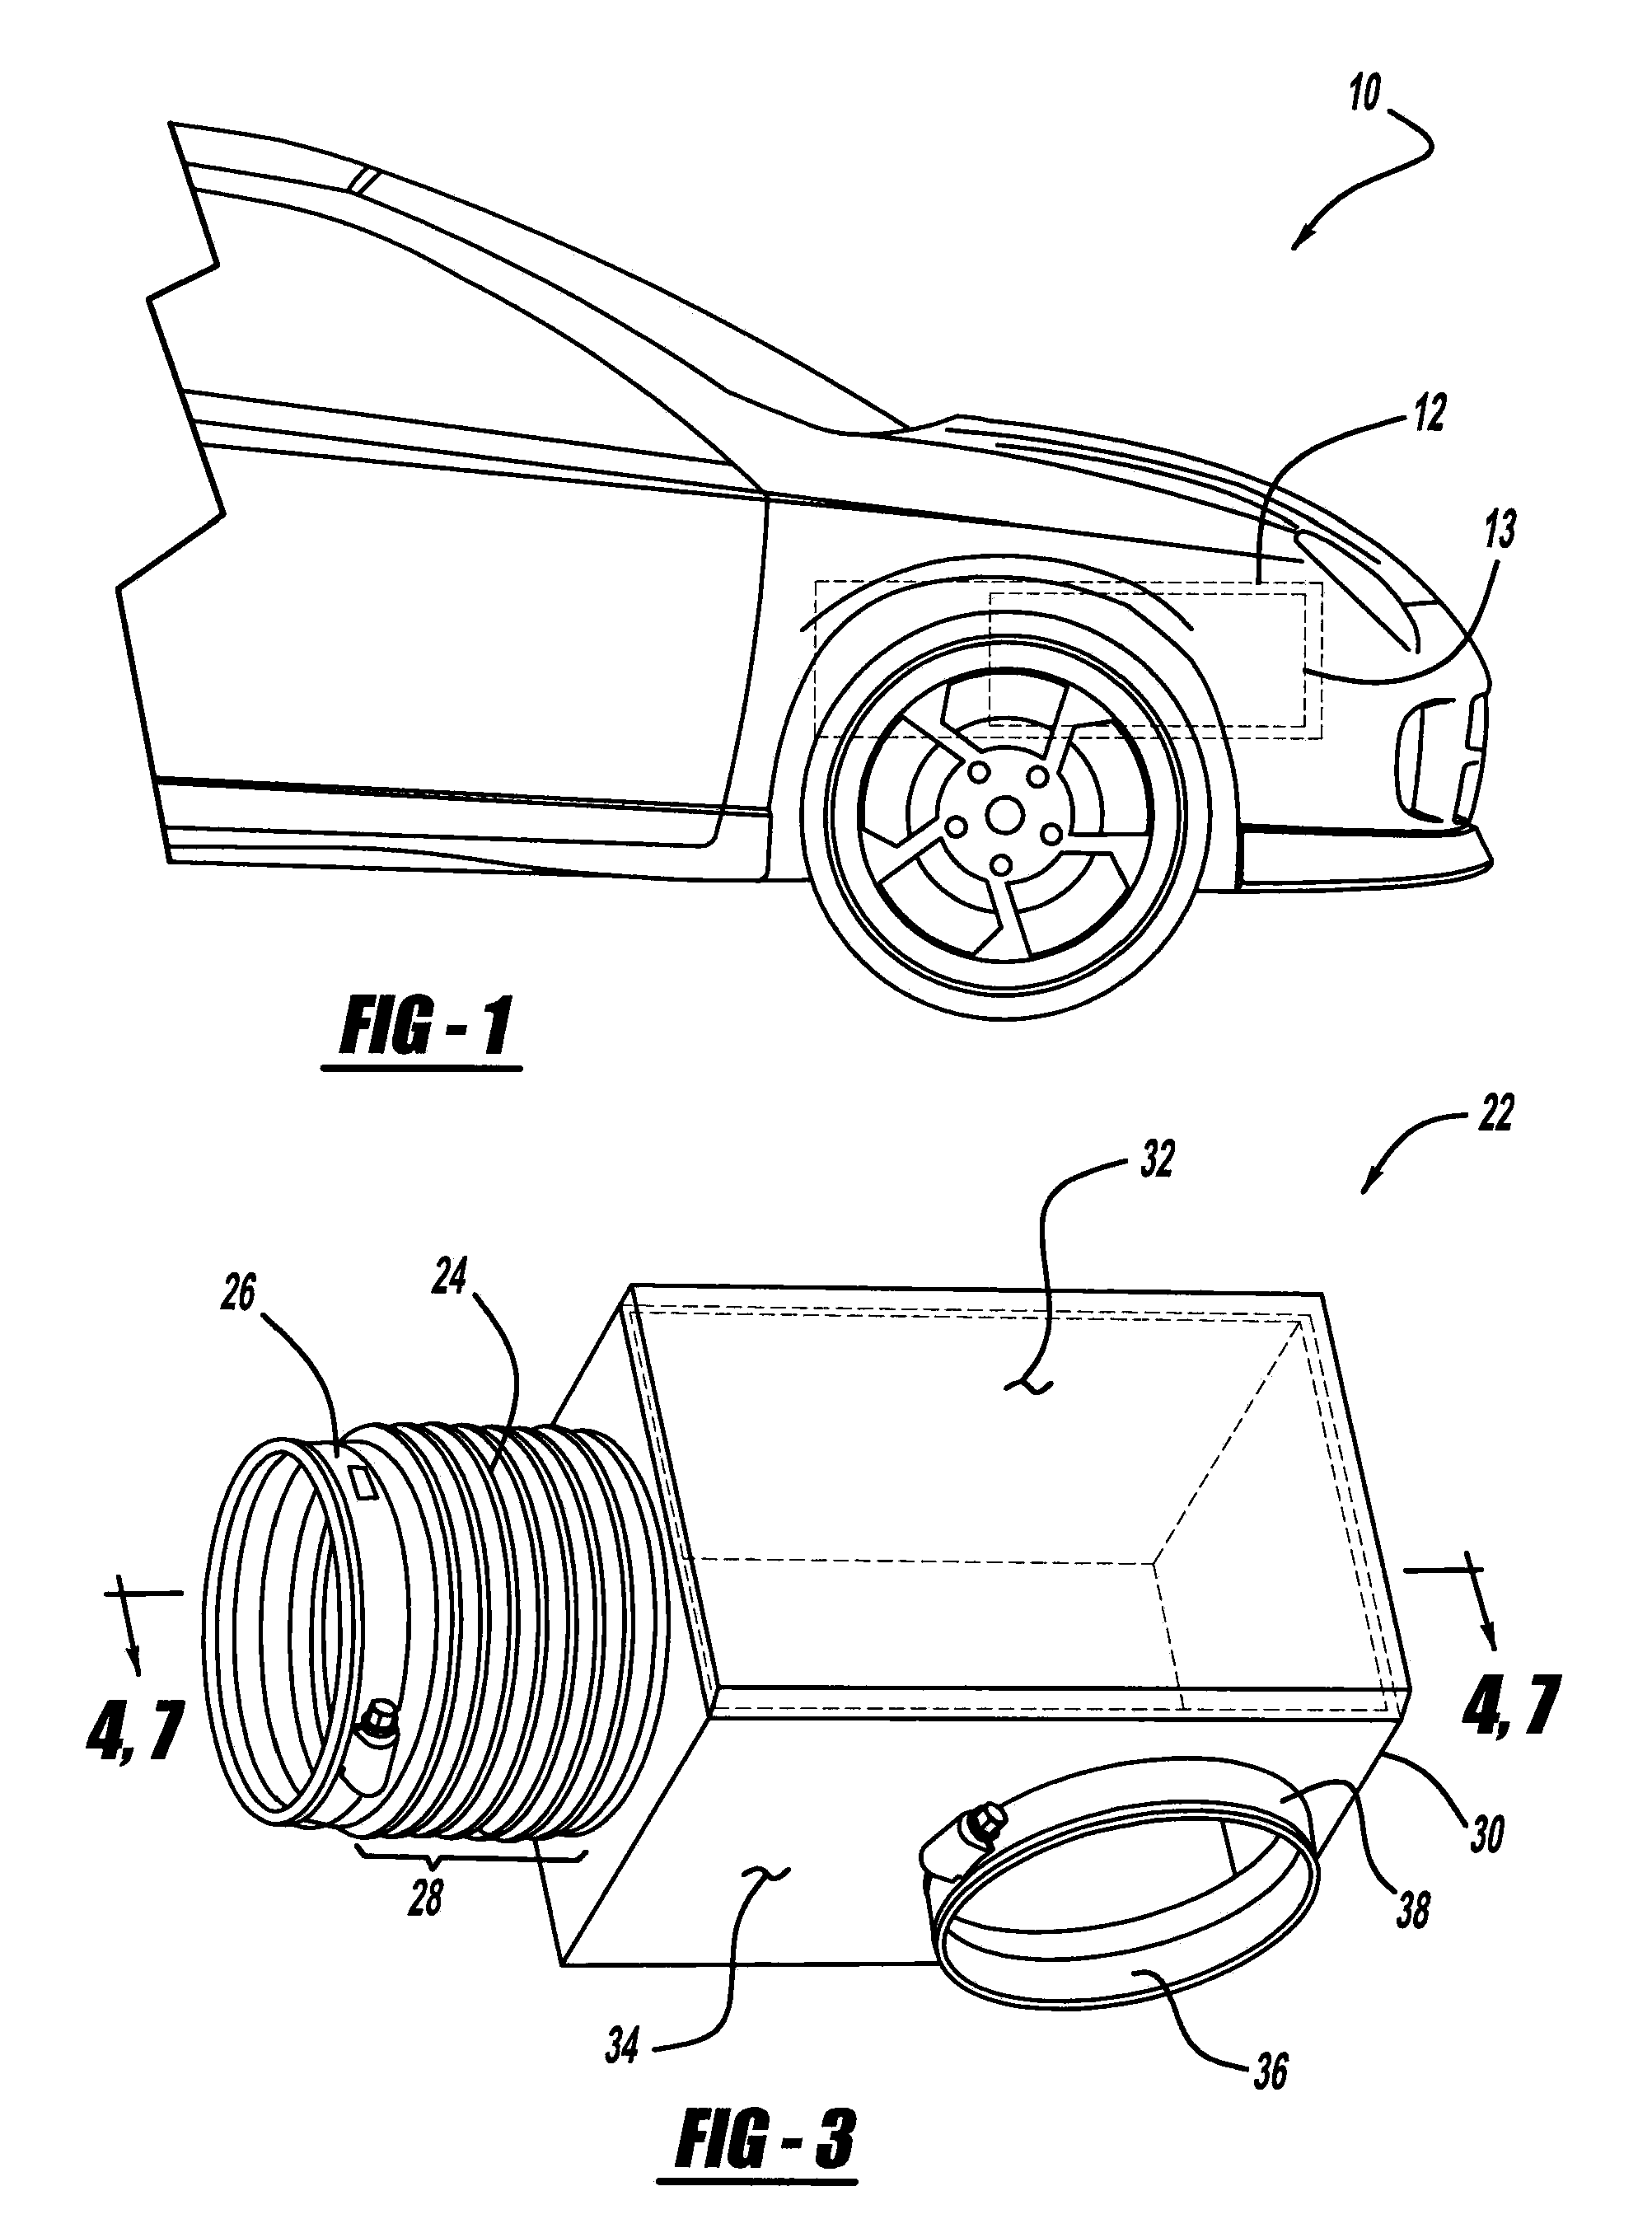 Flexible seal and molded rigid chamber